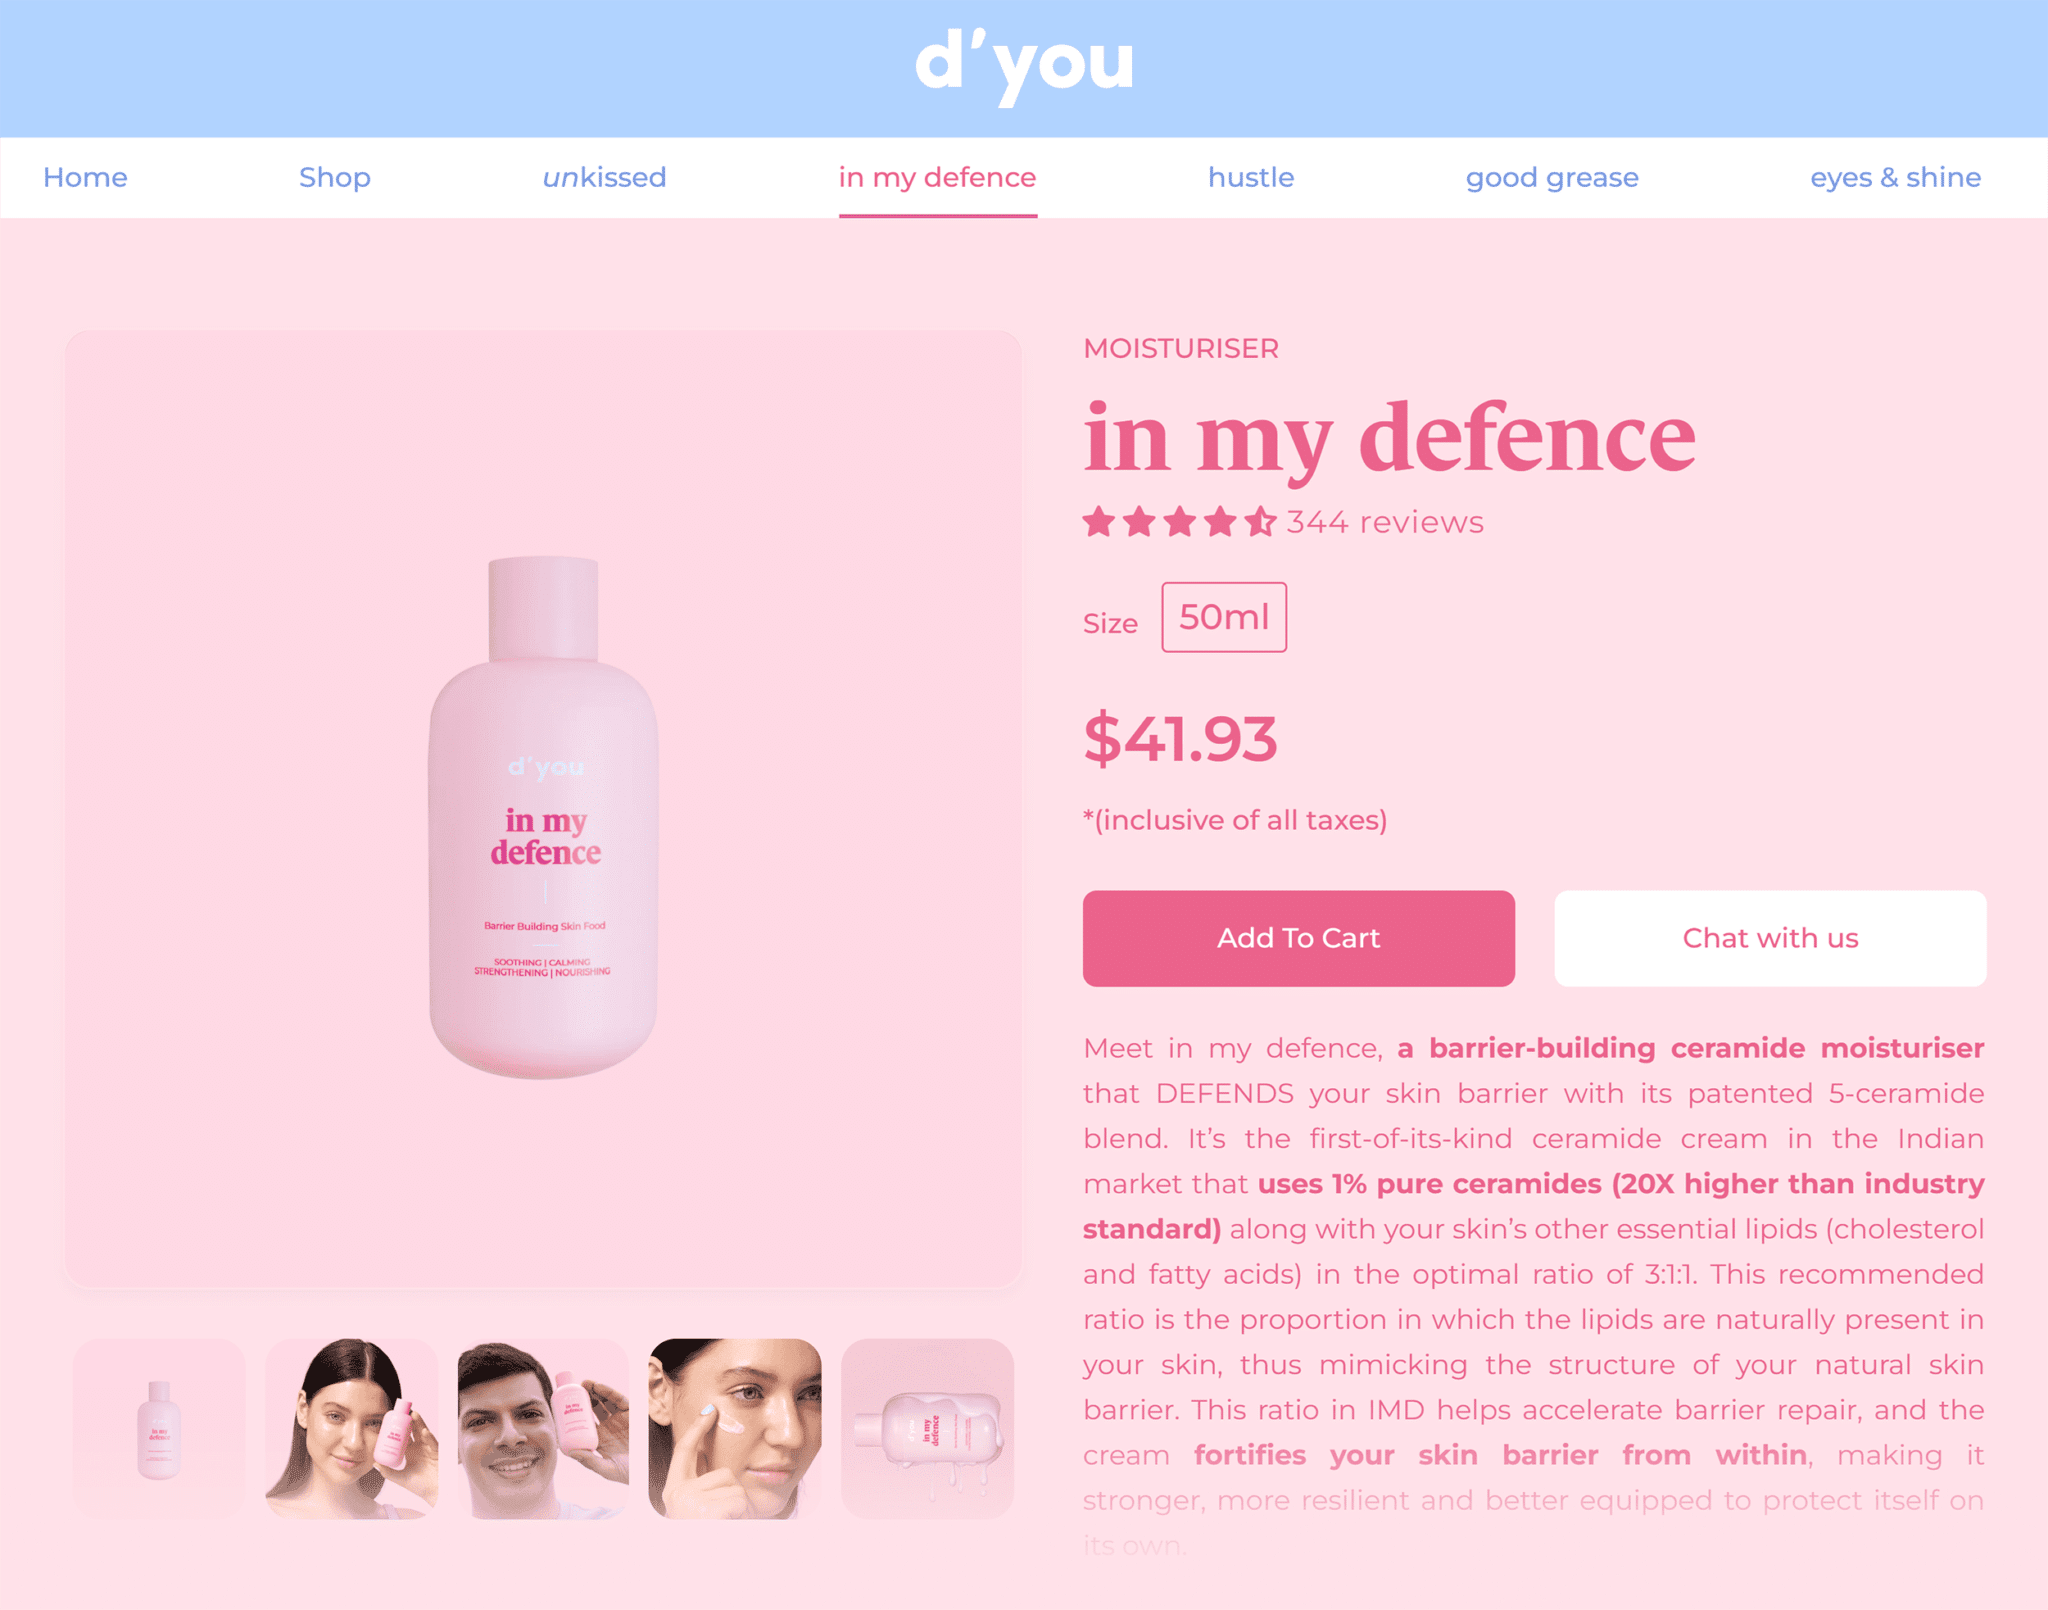 dyou-in-my-defence-moisturiser 20 Effective Product Page Examples (+ Best Practices)